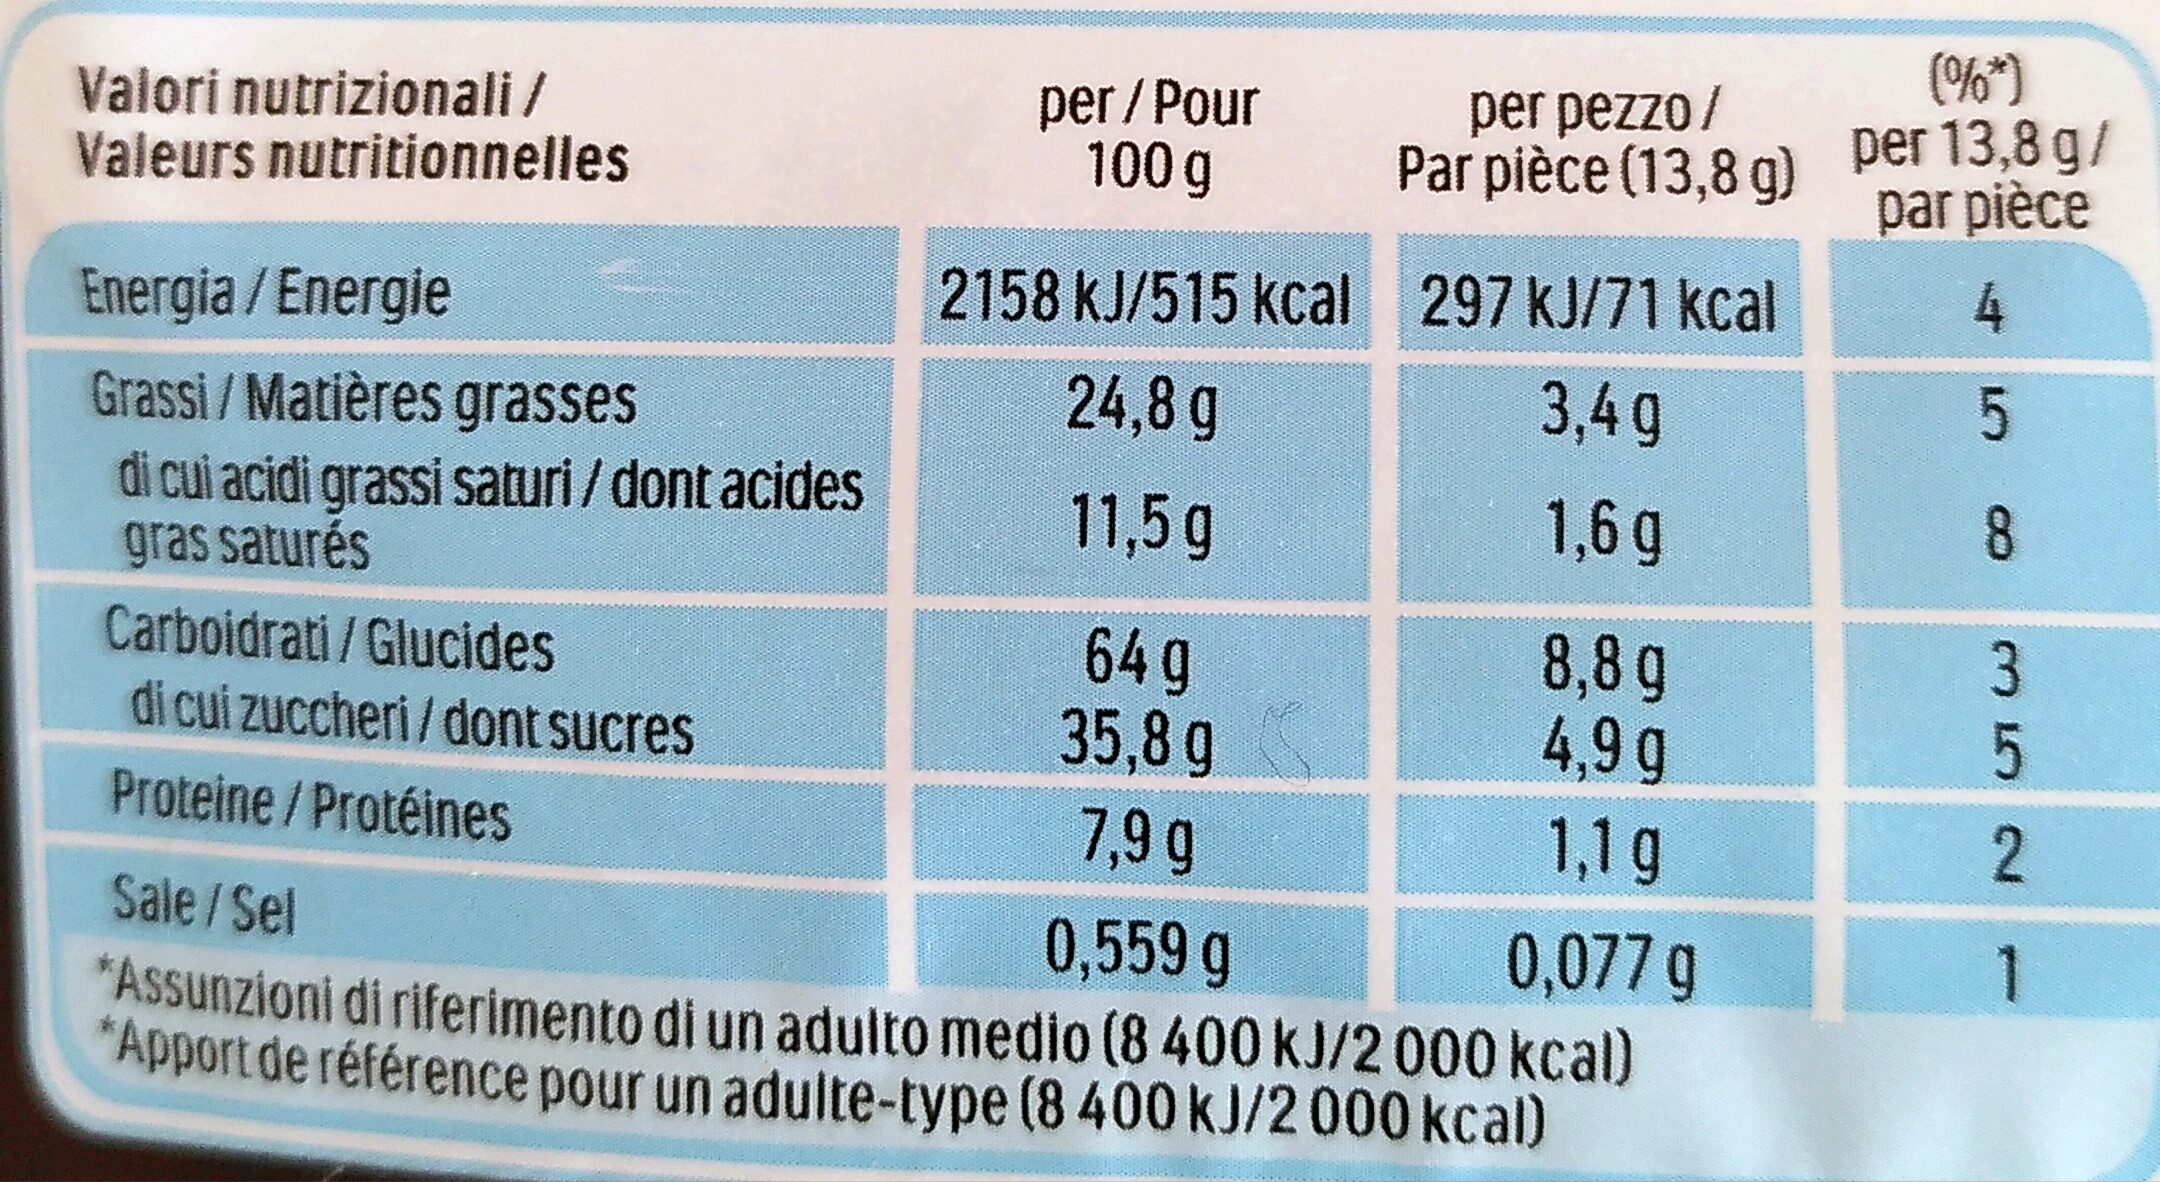 Ferrero- Nutella Biscuits Resealable Bag, 304g (10.7oz) - Nutrition facts - fr